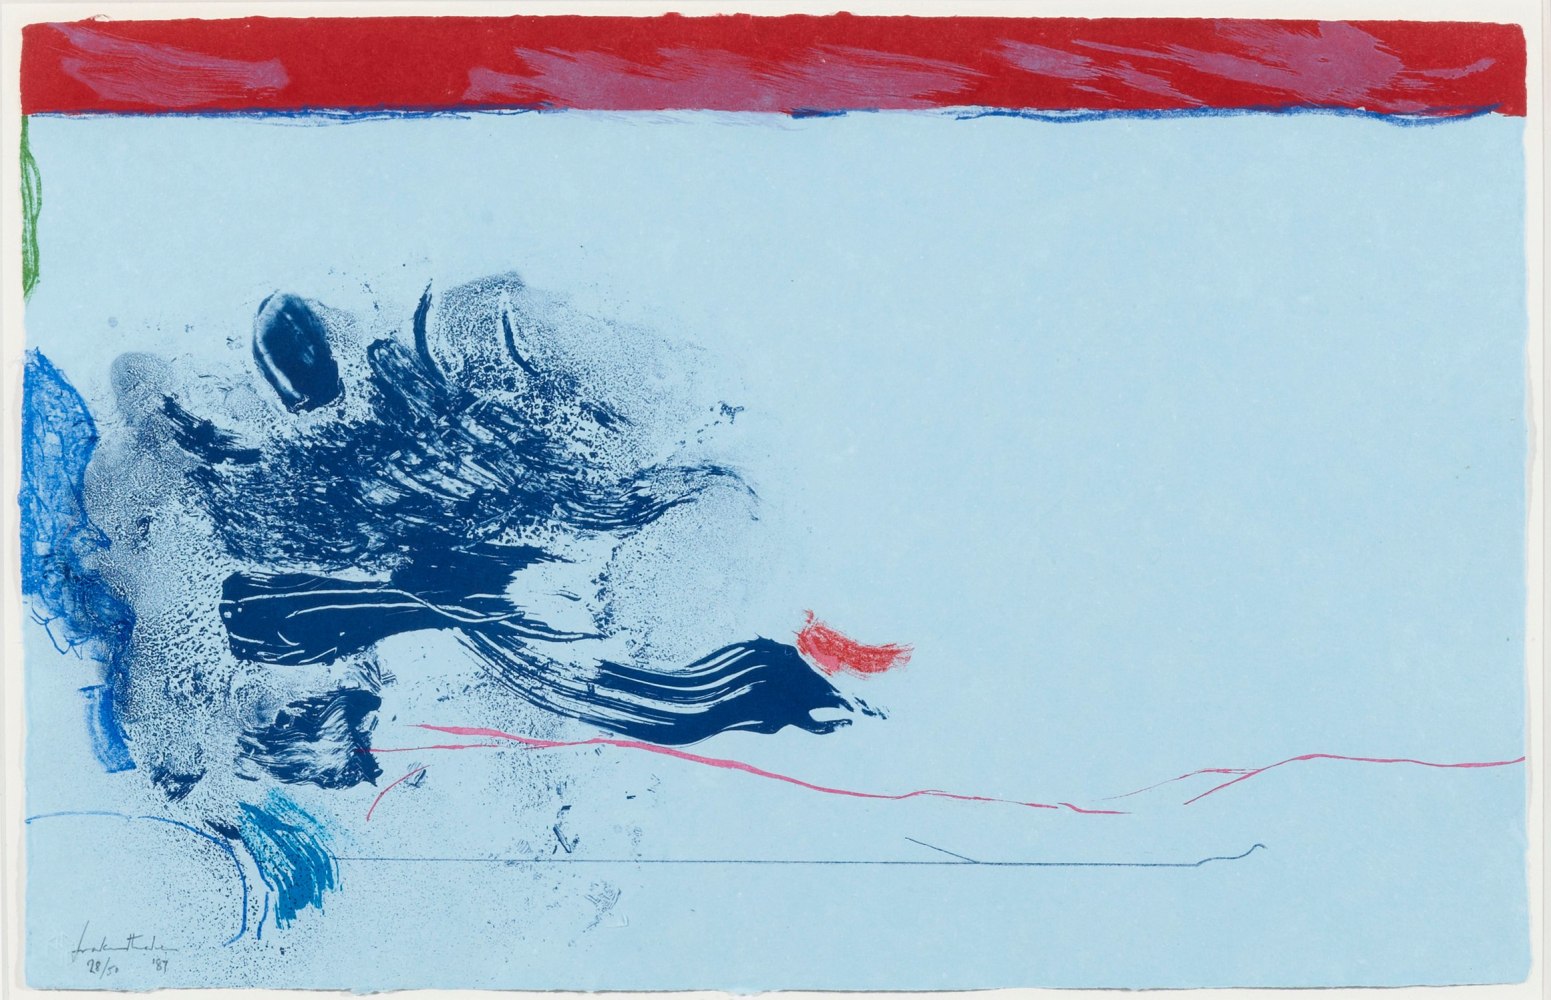 Helen Frankenthaler, In The Wings, 1987, Sugar-lift etching, soft-ground etching, aquatint, etching and lithograph